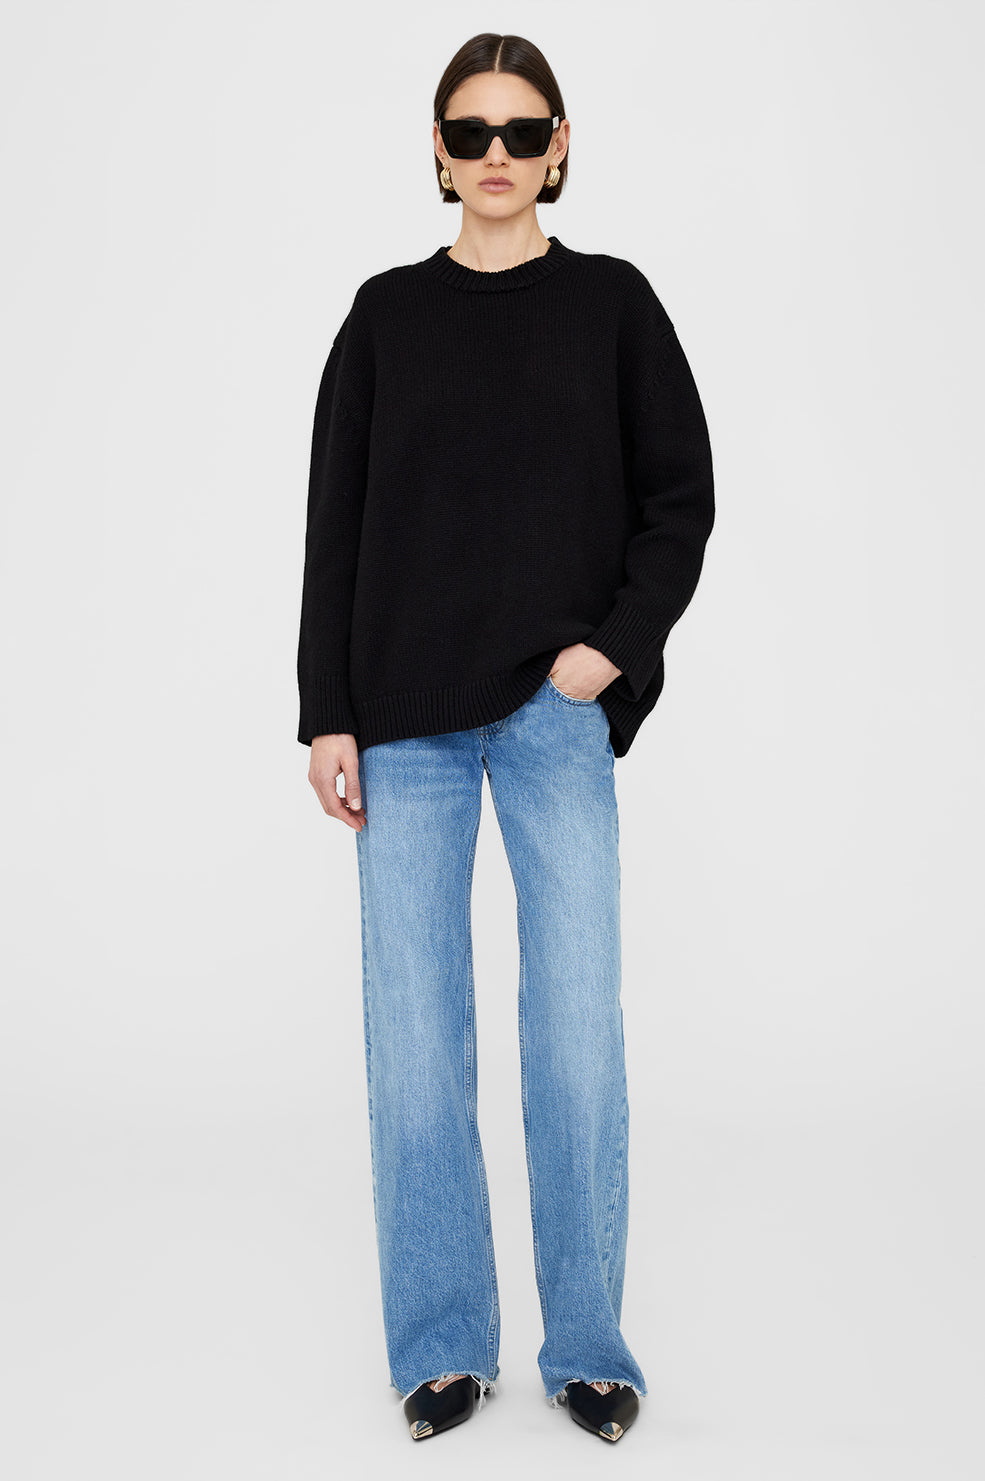 ANINE BING Rosie Cashmere Sweater - Black - On Model Front